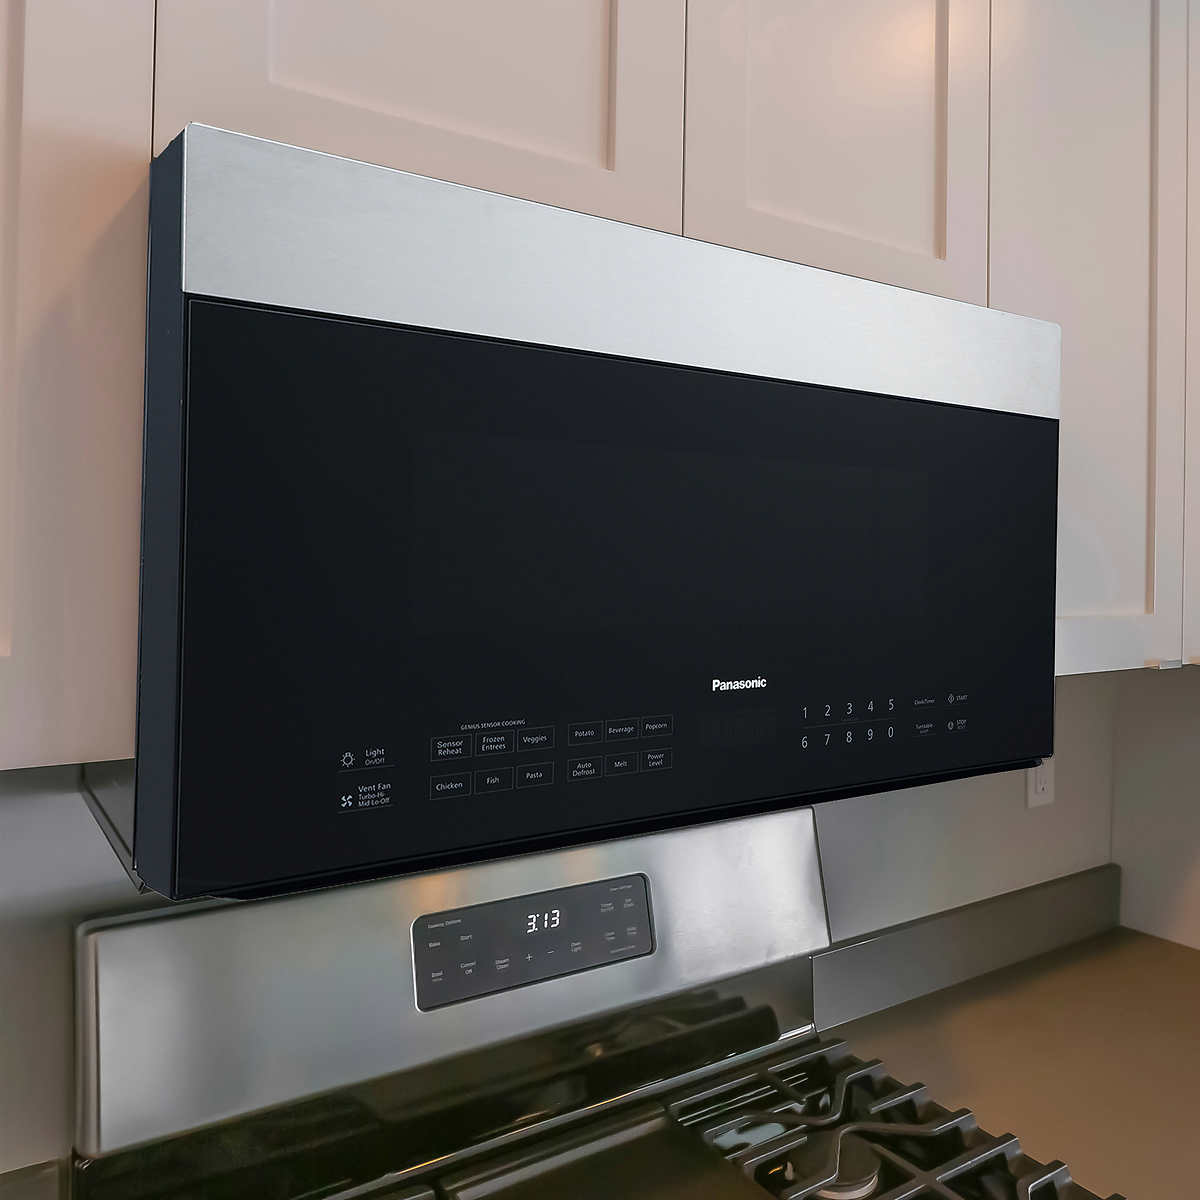 Panasonic 1 9cuft Over The Range Microwave With Sensor Cooking In Smoked Glass Stainless Steel